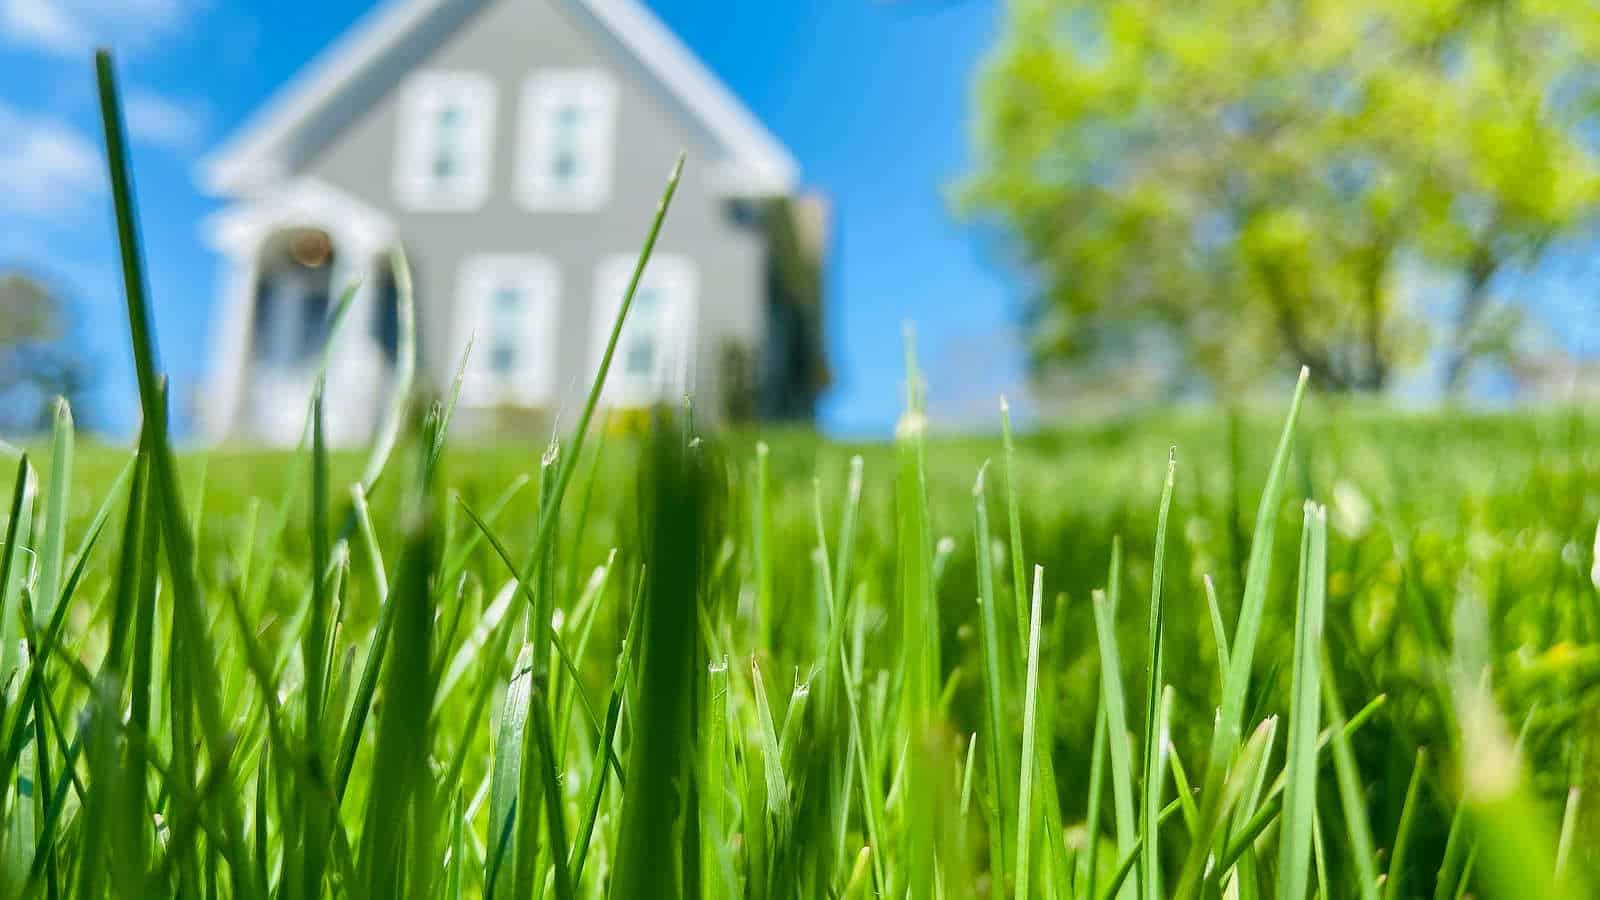 A close-up photo of lawn grass with a house and tree in the background.